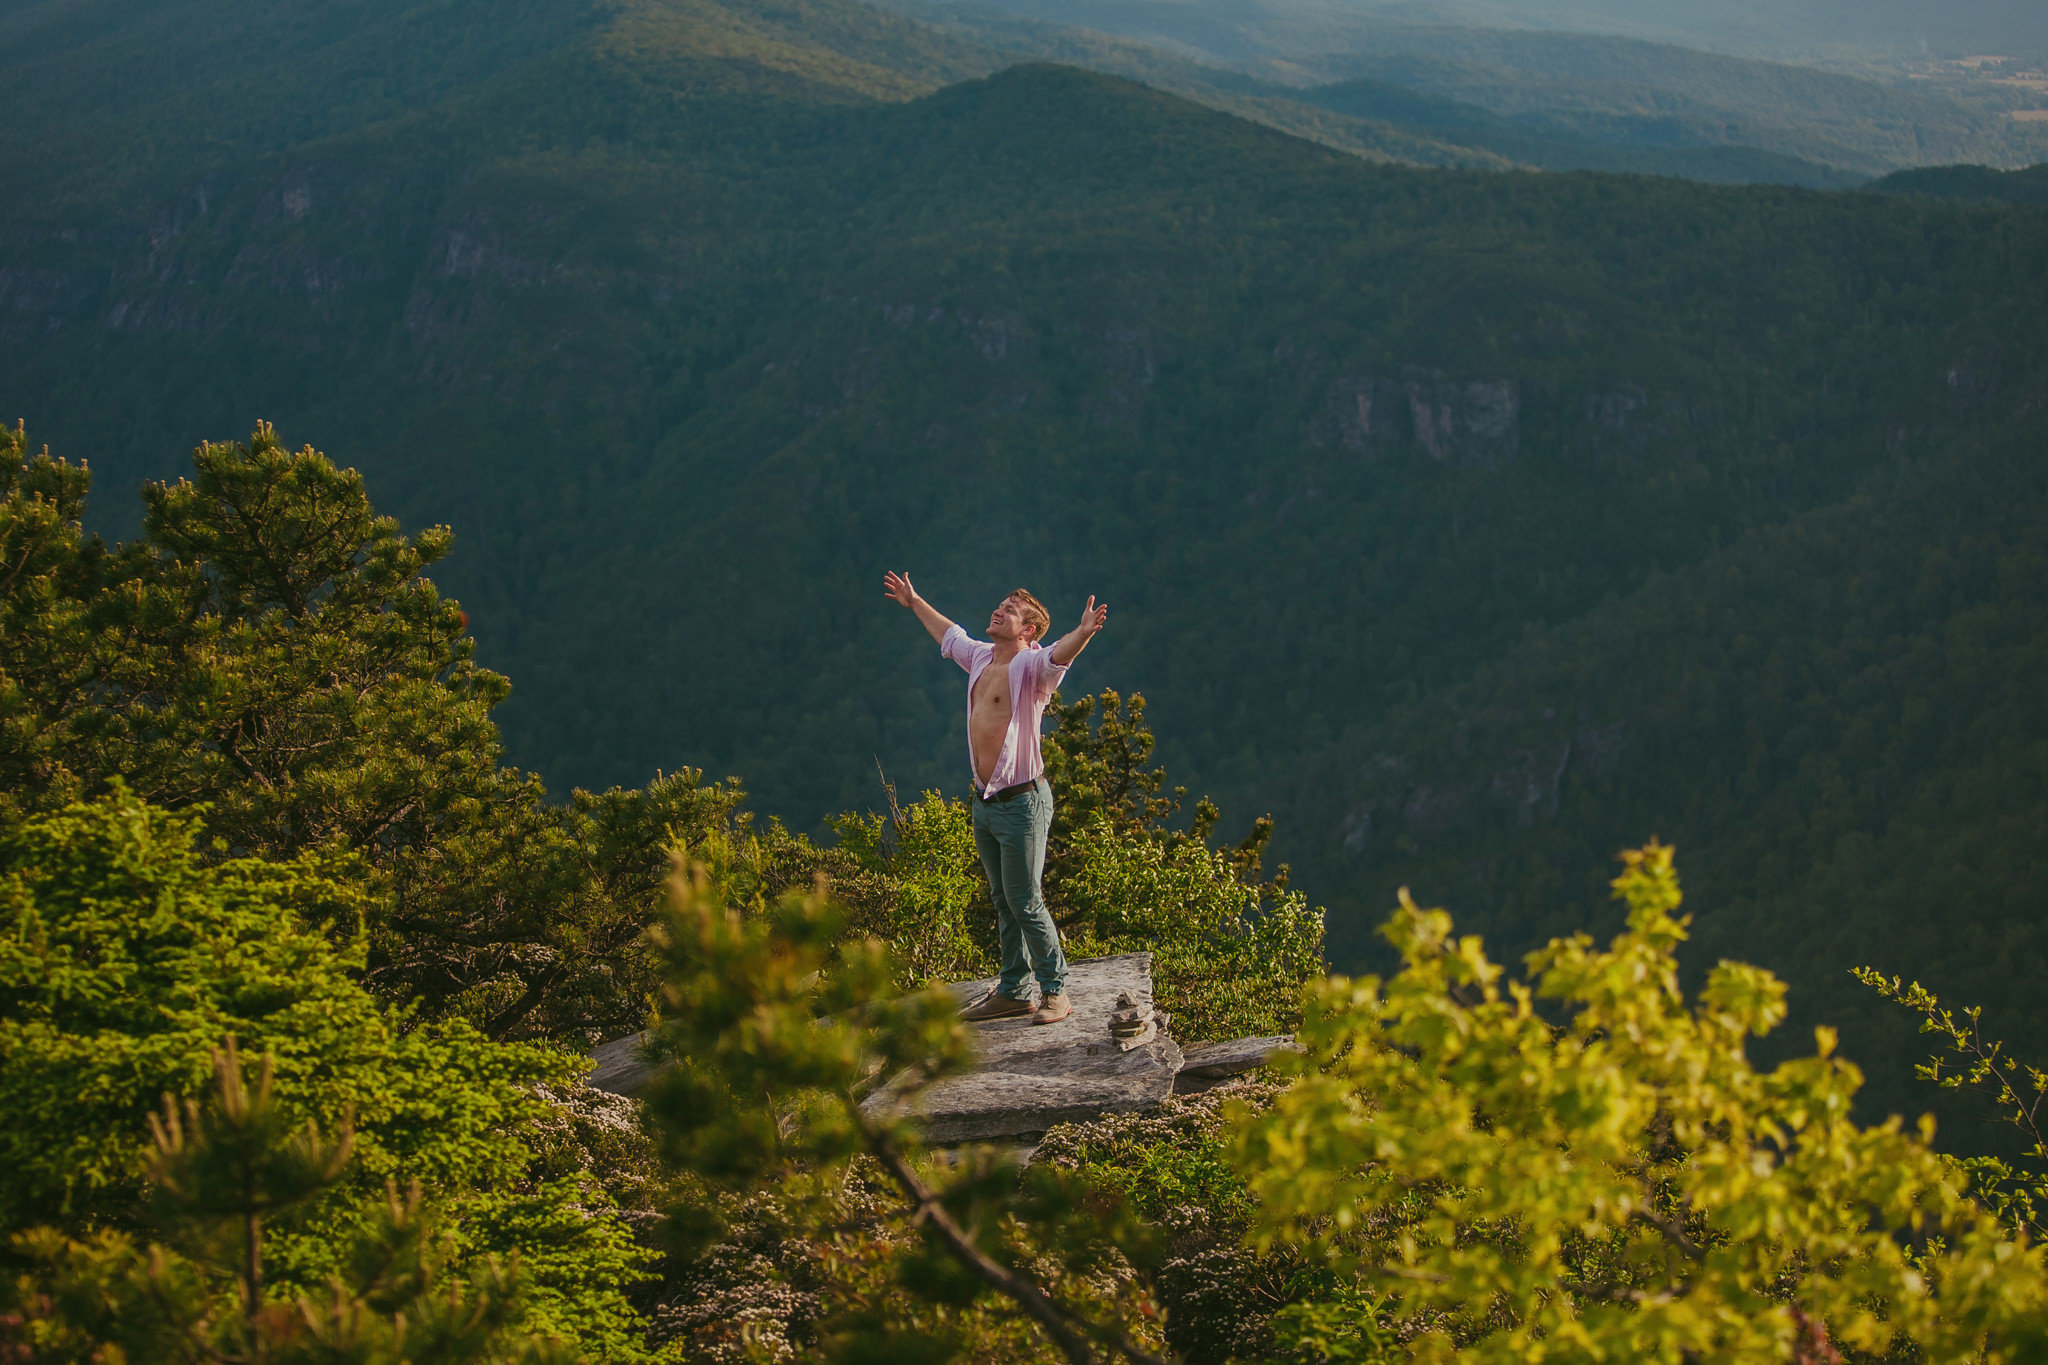 Man takes in the epic mountain view at Hawksbill Mountain in Linville, NC Photo by Mabyn